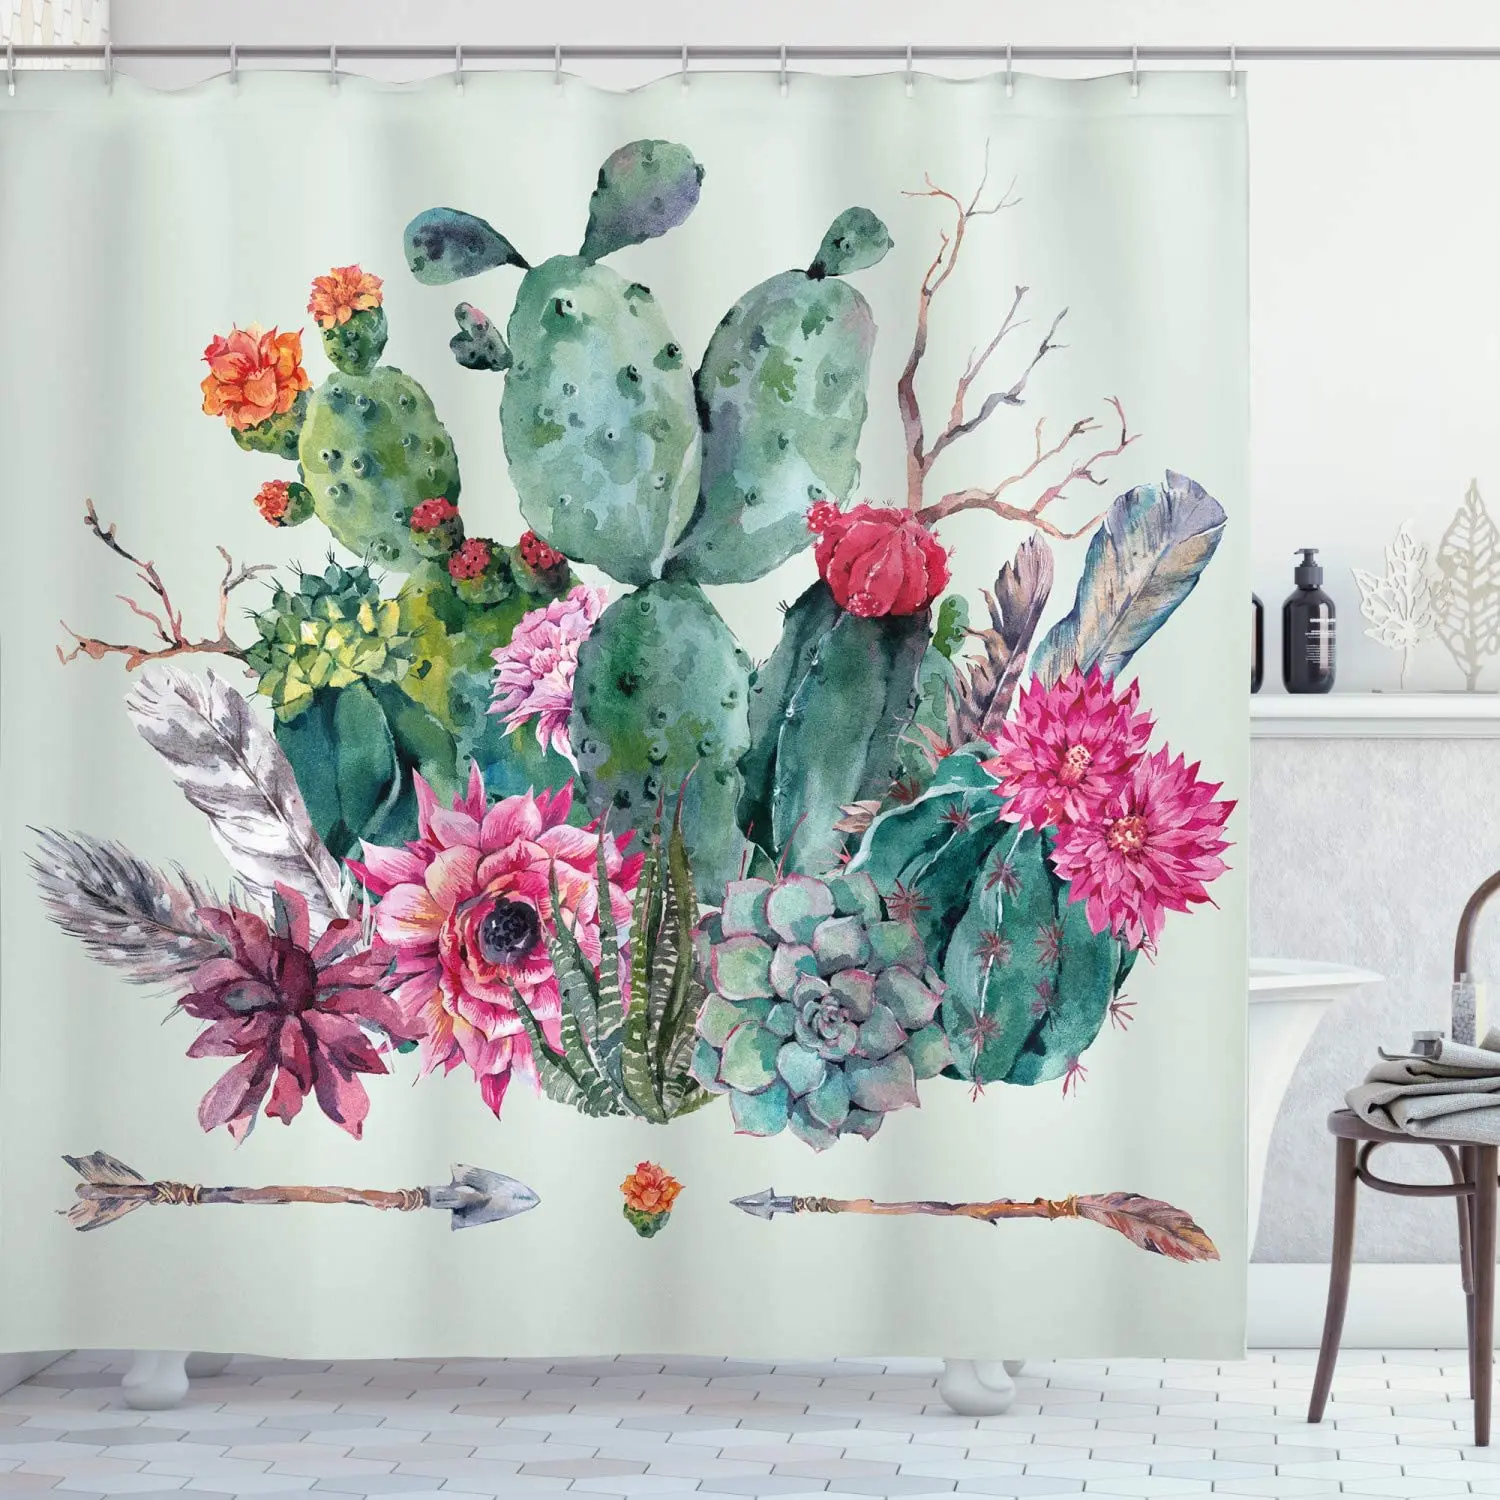 

Cactus Shower Curtain, Spring Garden with Boho Style Bouquet of Thorny Plants Blossoms Arrows Feathers, Cloth Fabric B